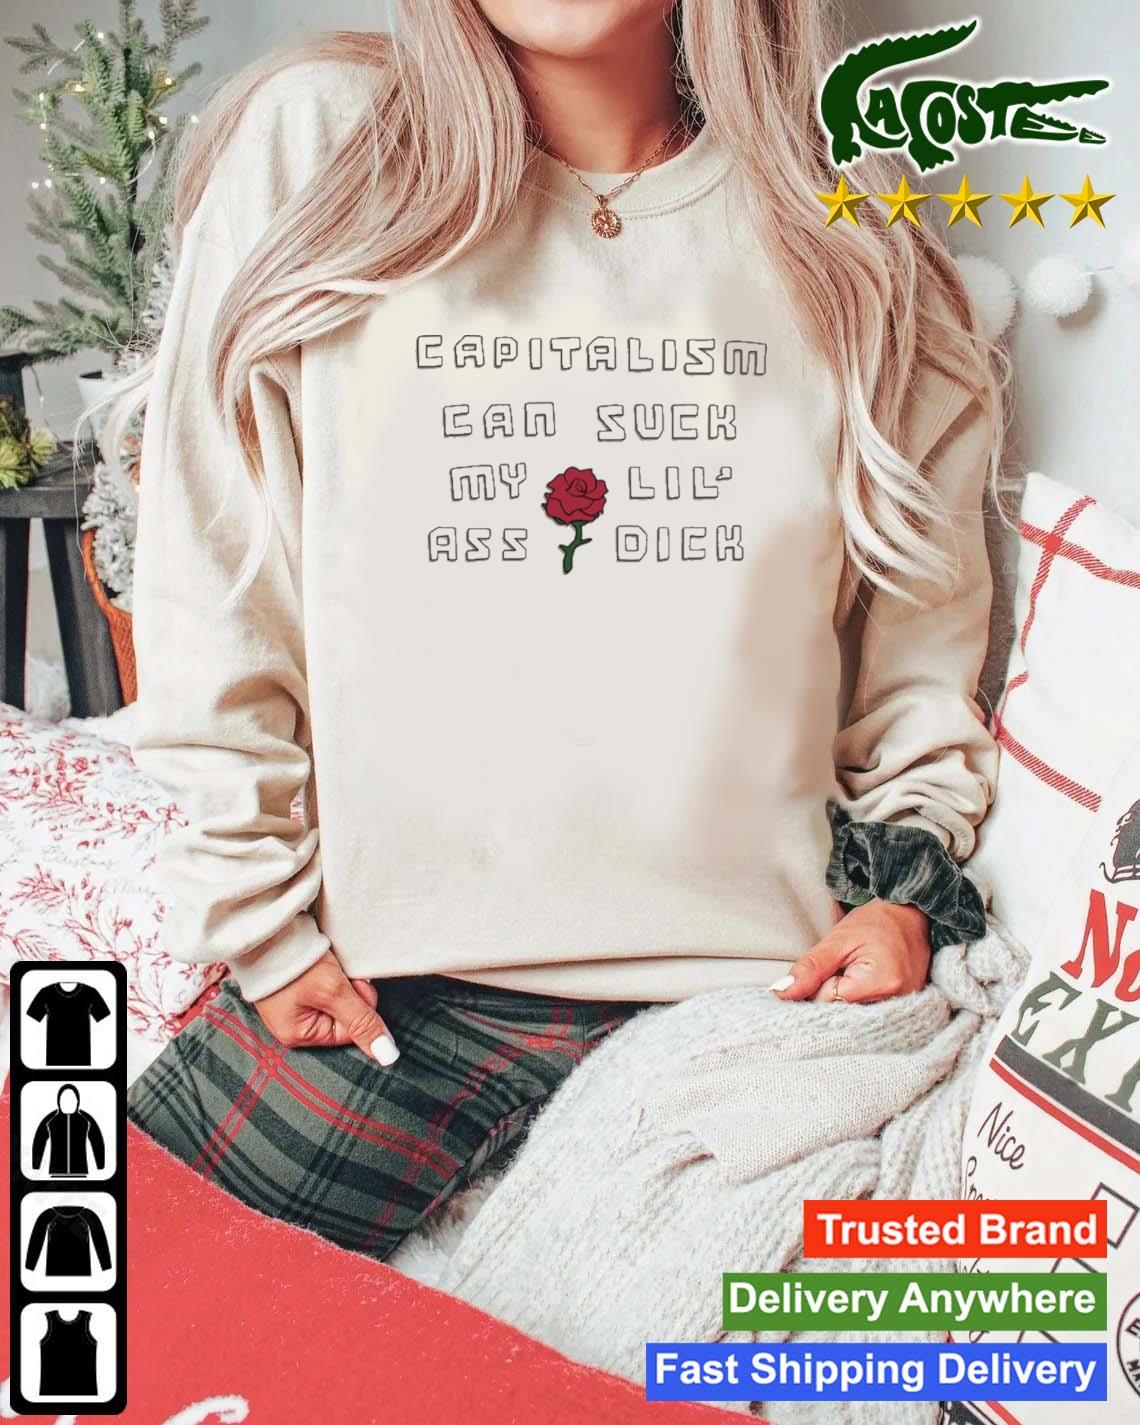 Capitalism Can Suck My Lil' Ass Dick T-s Mockup Sweater